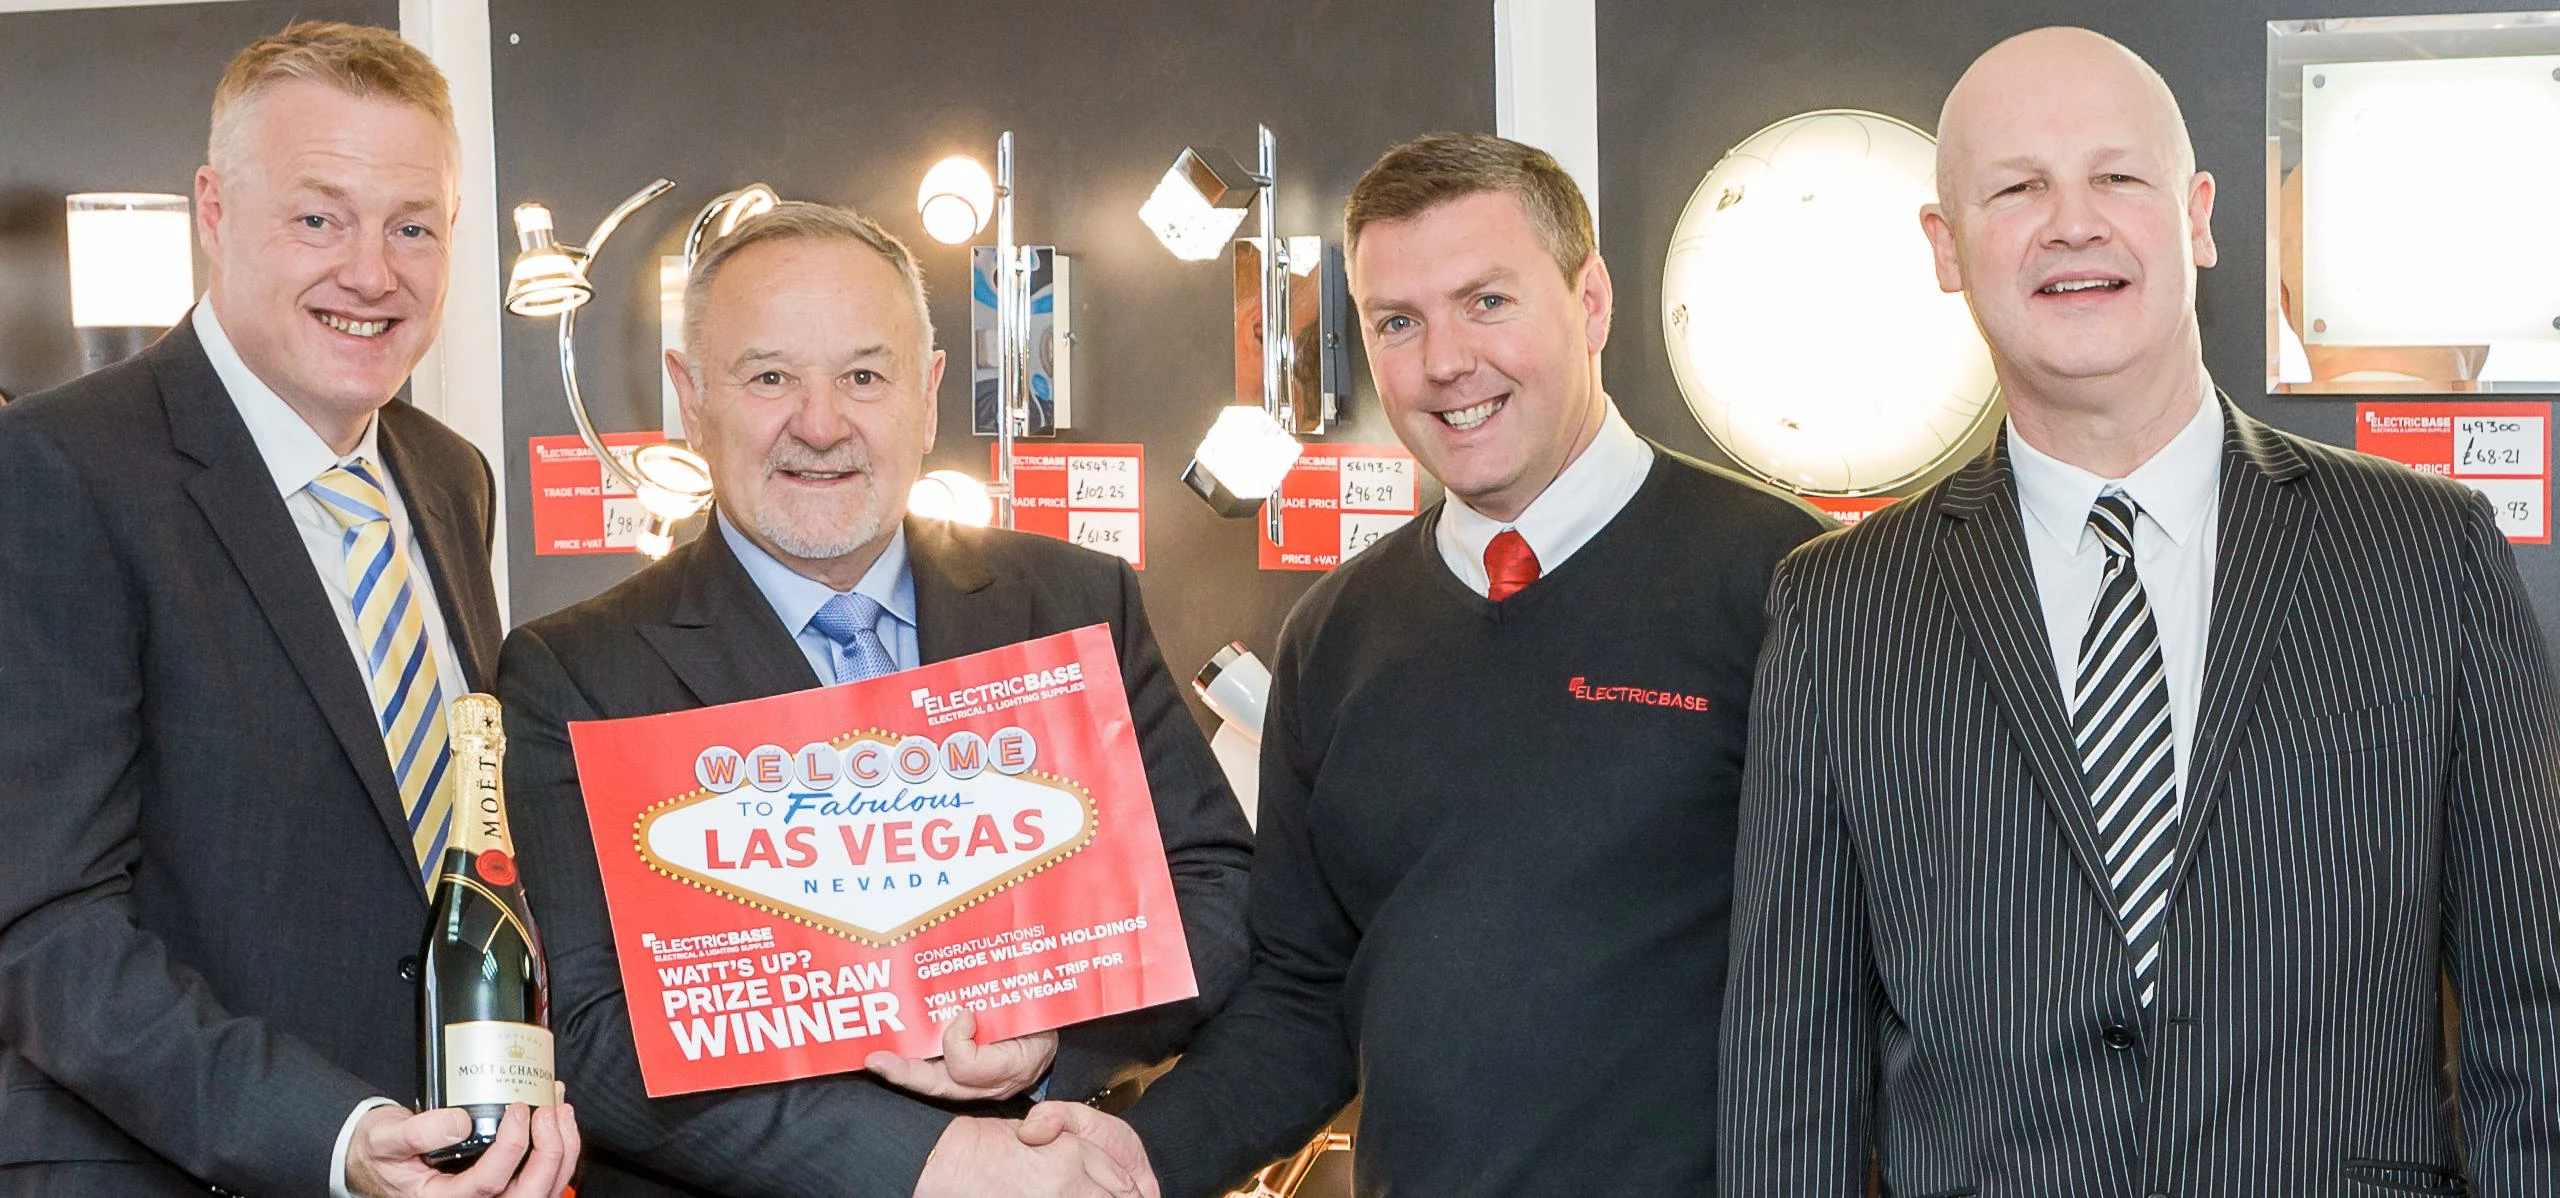 George Wilson (second left) receiving his prize from the Electricbase team